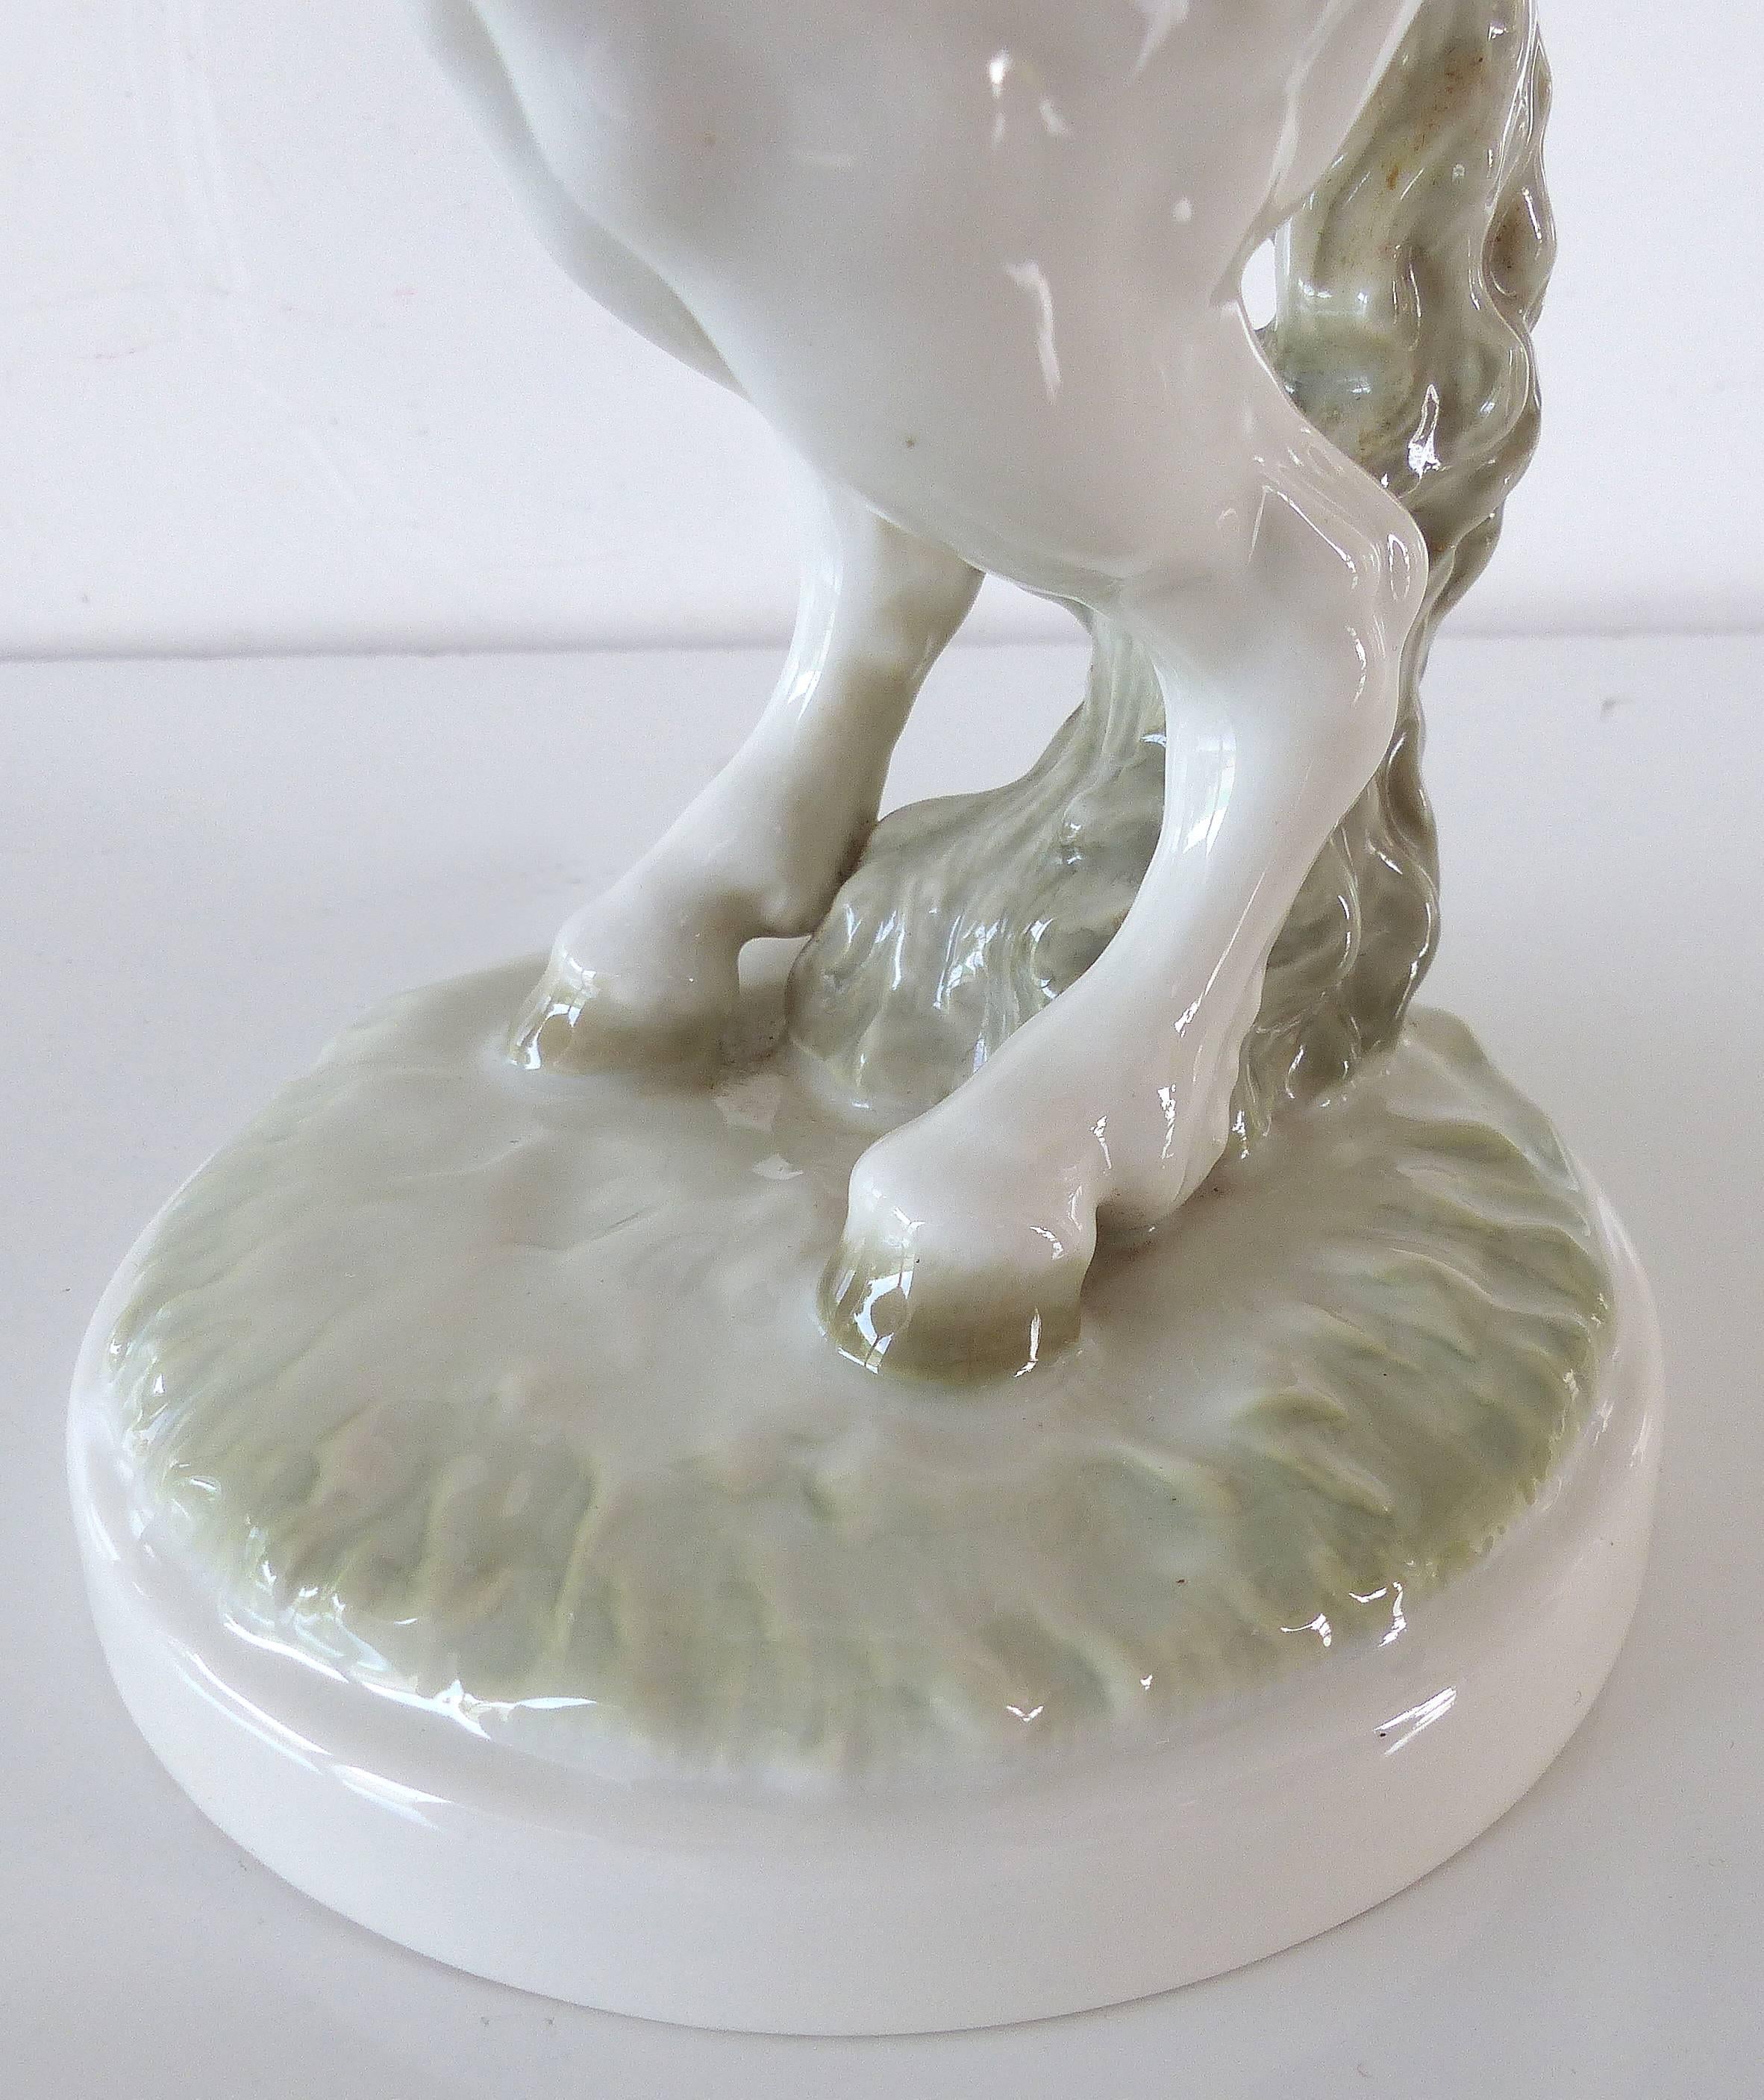 Hutschenreuther Germany Porcelain Rearing Horse and Rider 6